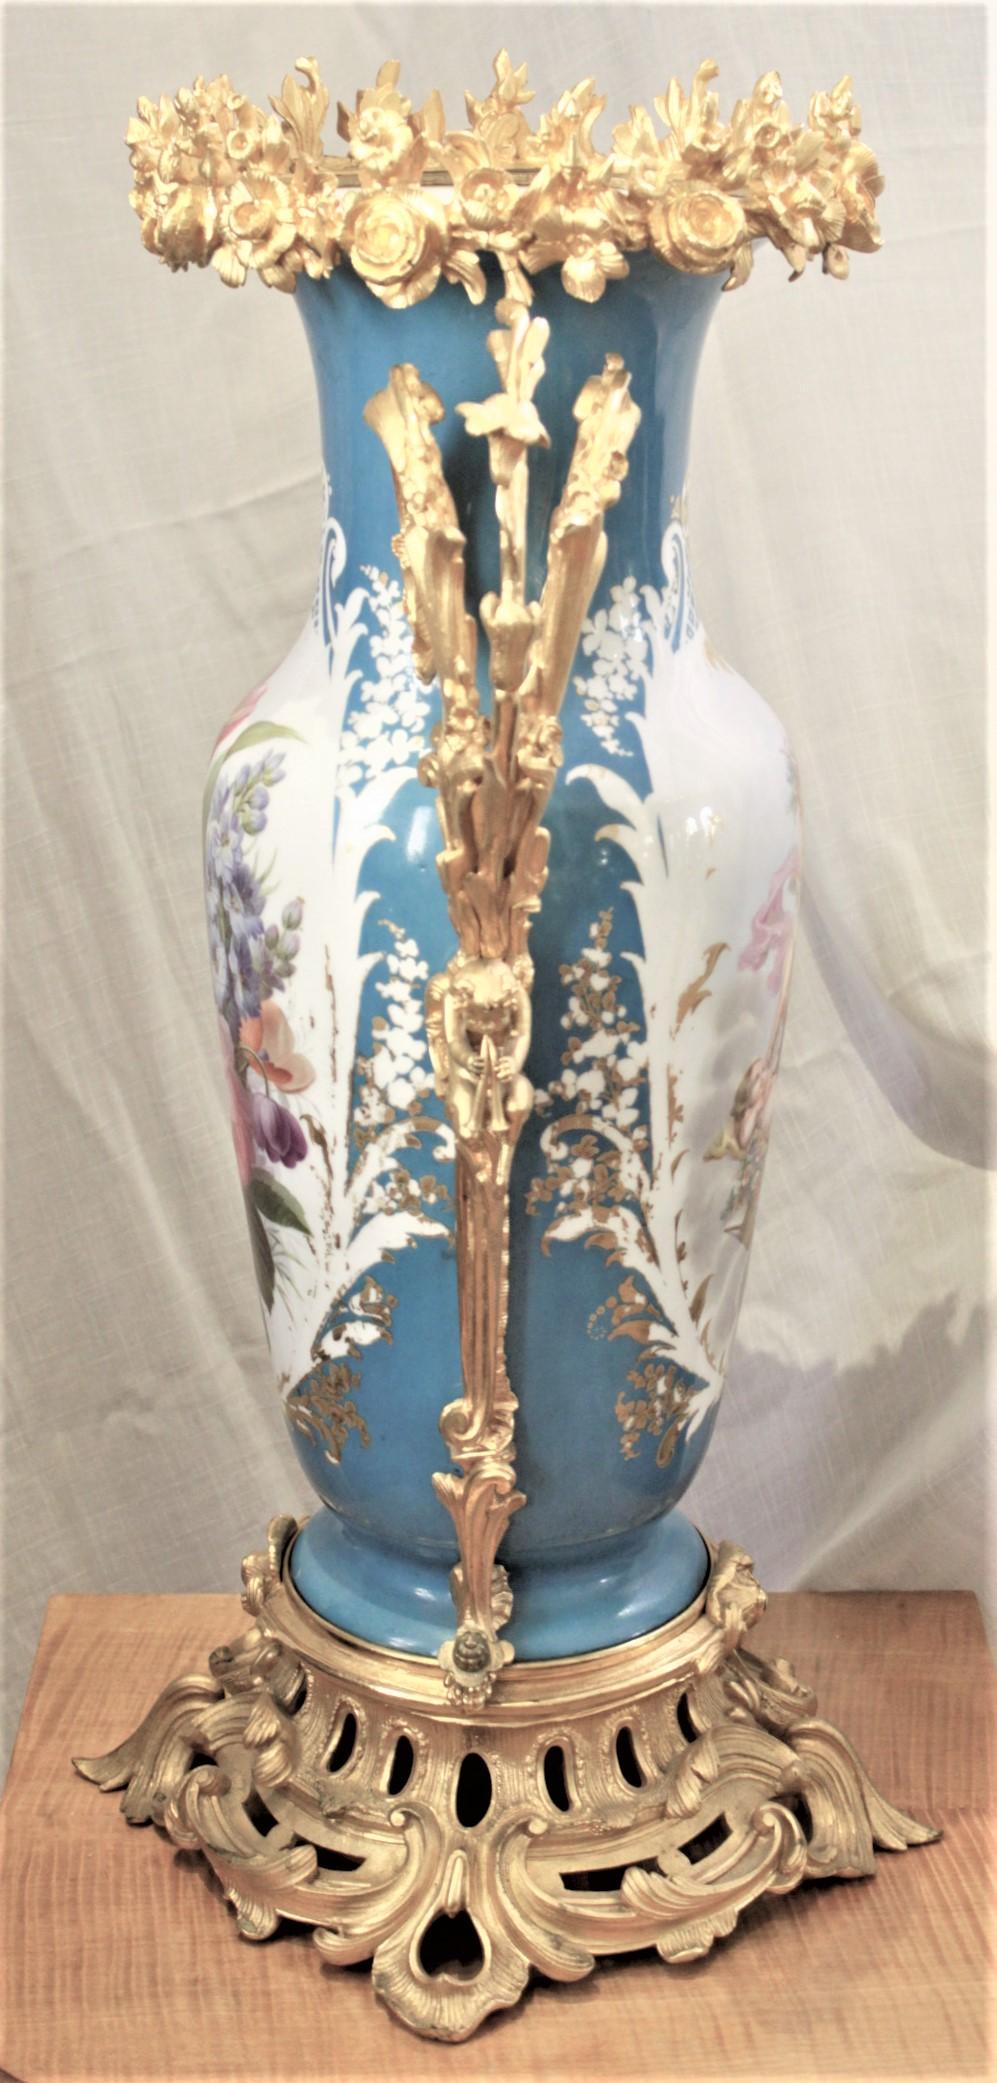 19th Century Large Antique Sevres Styled Hand-Painted Porcelain Vase with Gilt Bronze Mounts For Sale